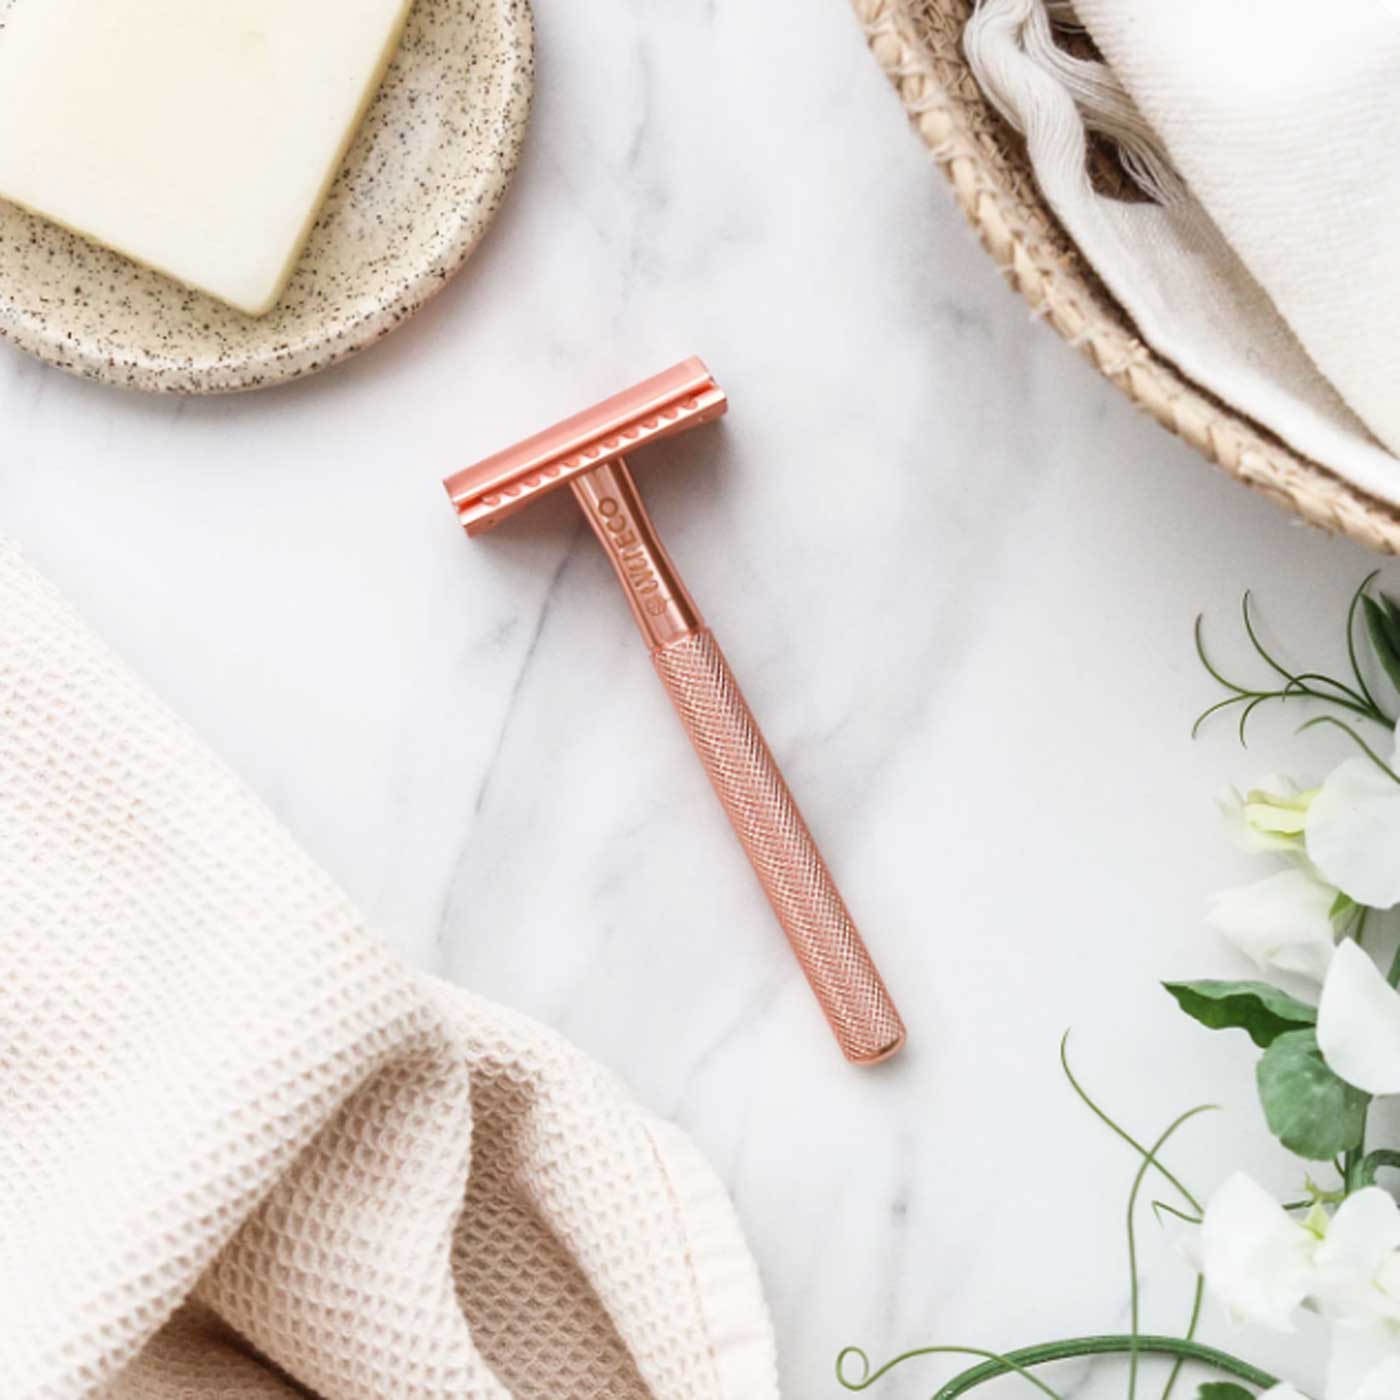 Rose gold eco-friendly reusable razor. Styled on a bathroom benchtop.